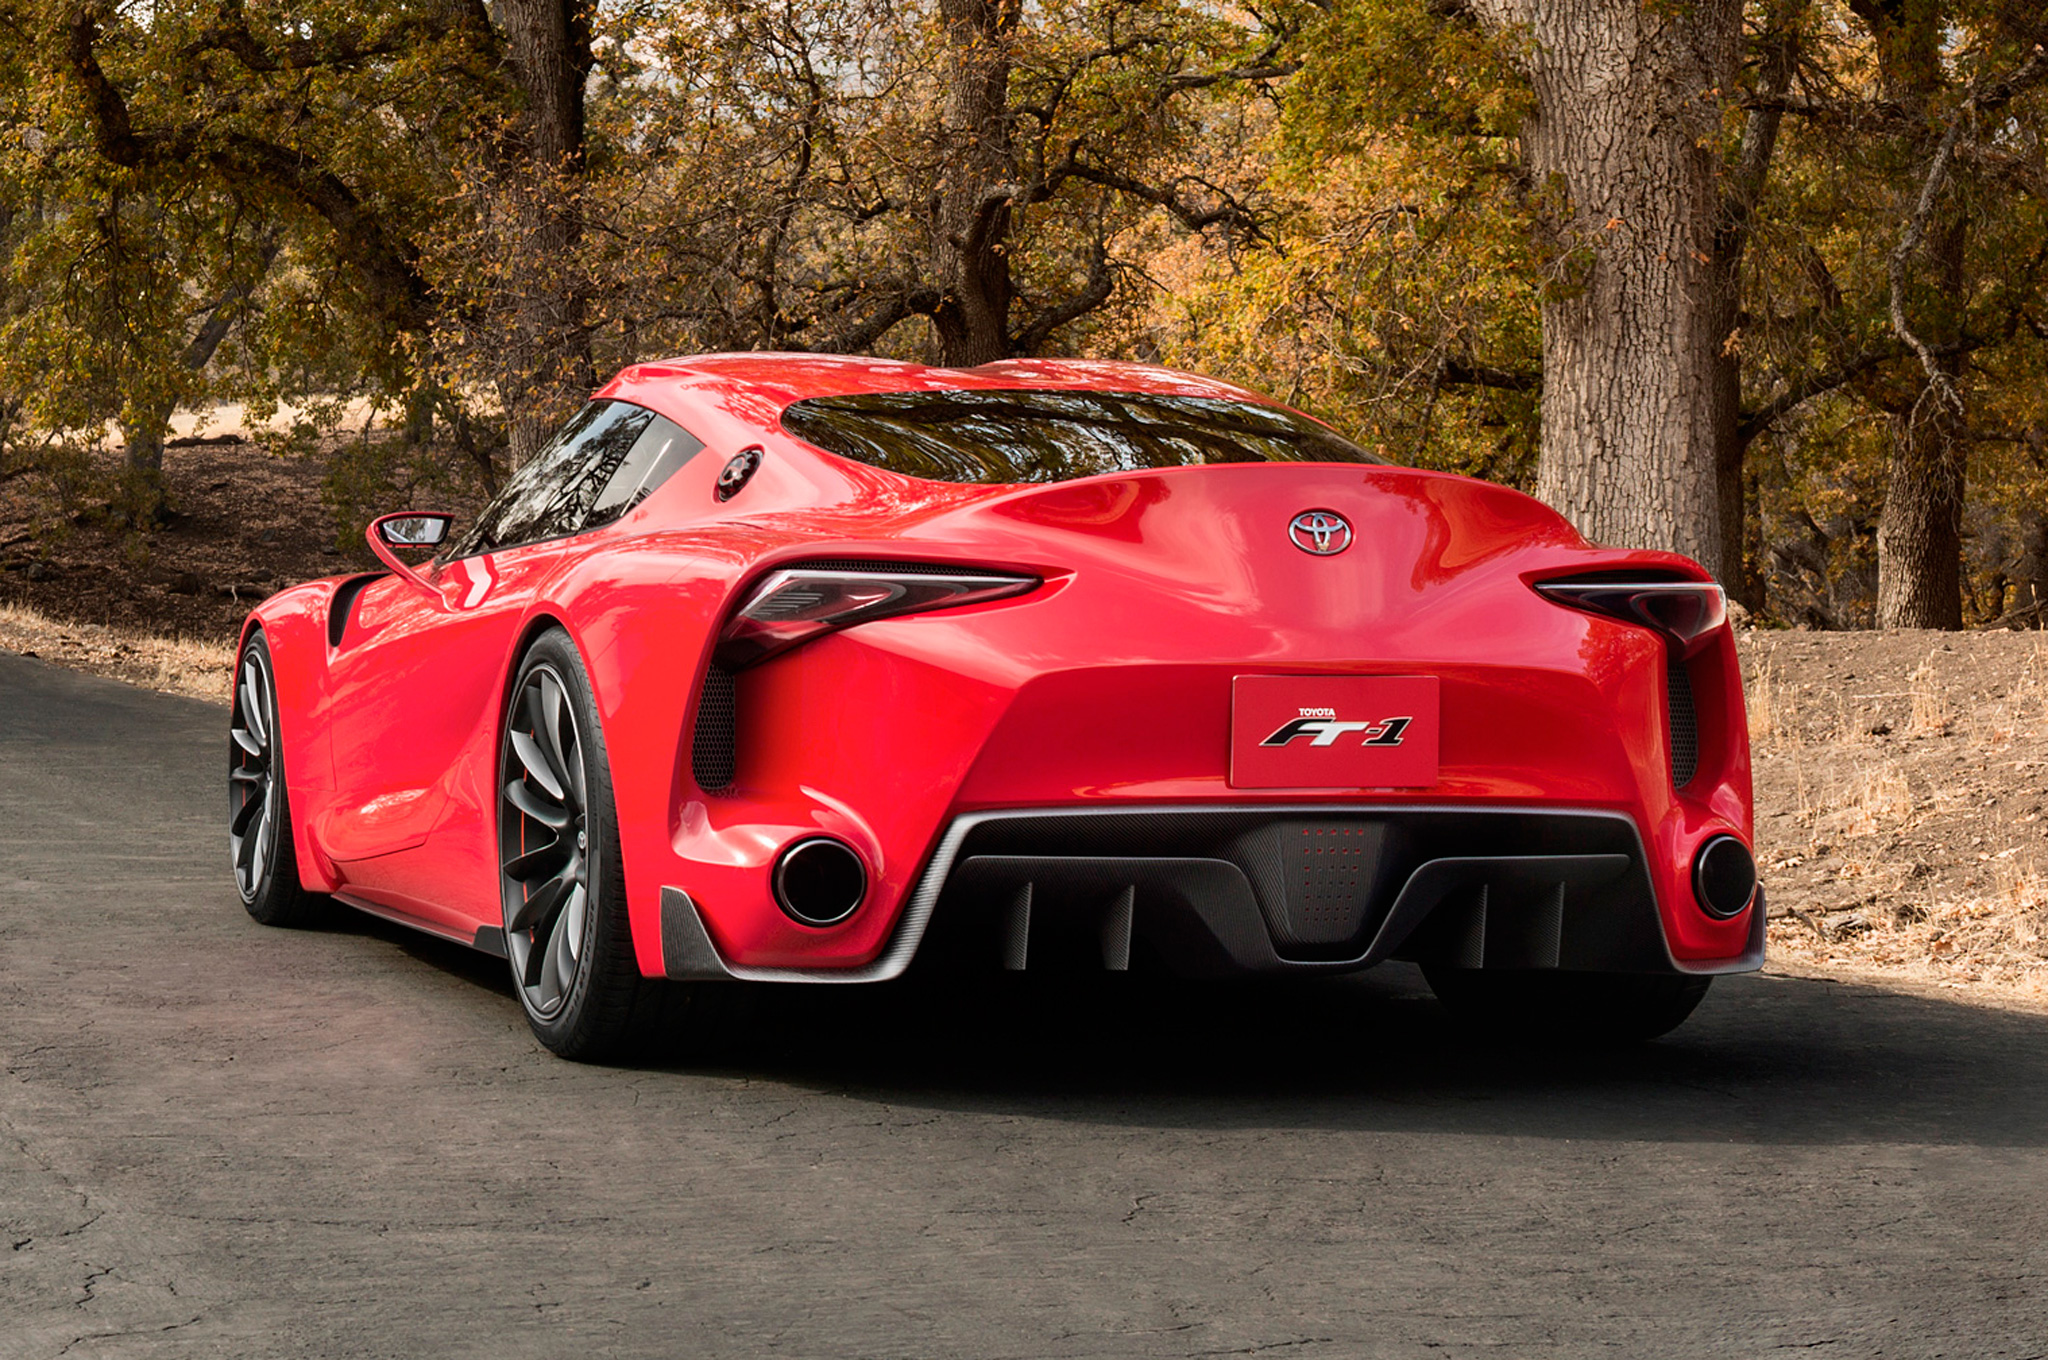 Toyota-FT-1-Concept-rear-three-quarters-view-on-road-2.jpg